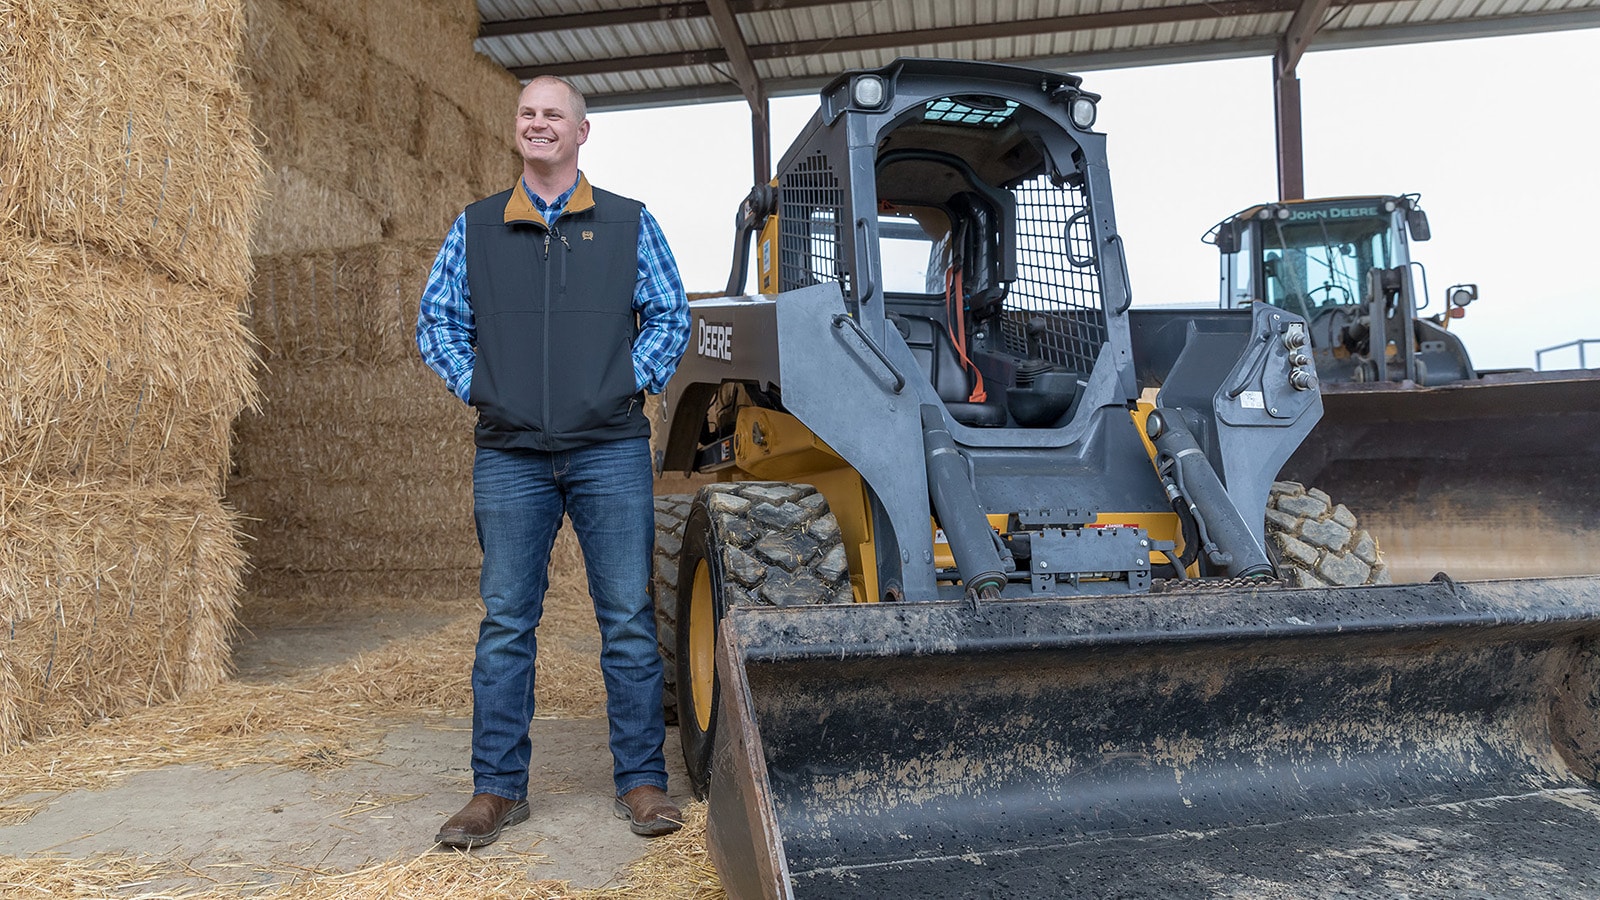 John Verwey stands next to his 332G Skid Steer with bales of hay in the background